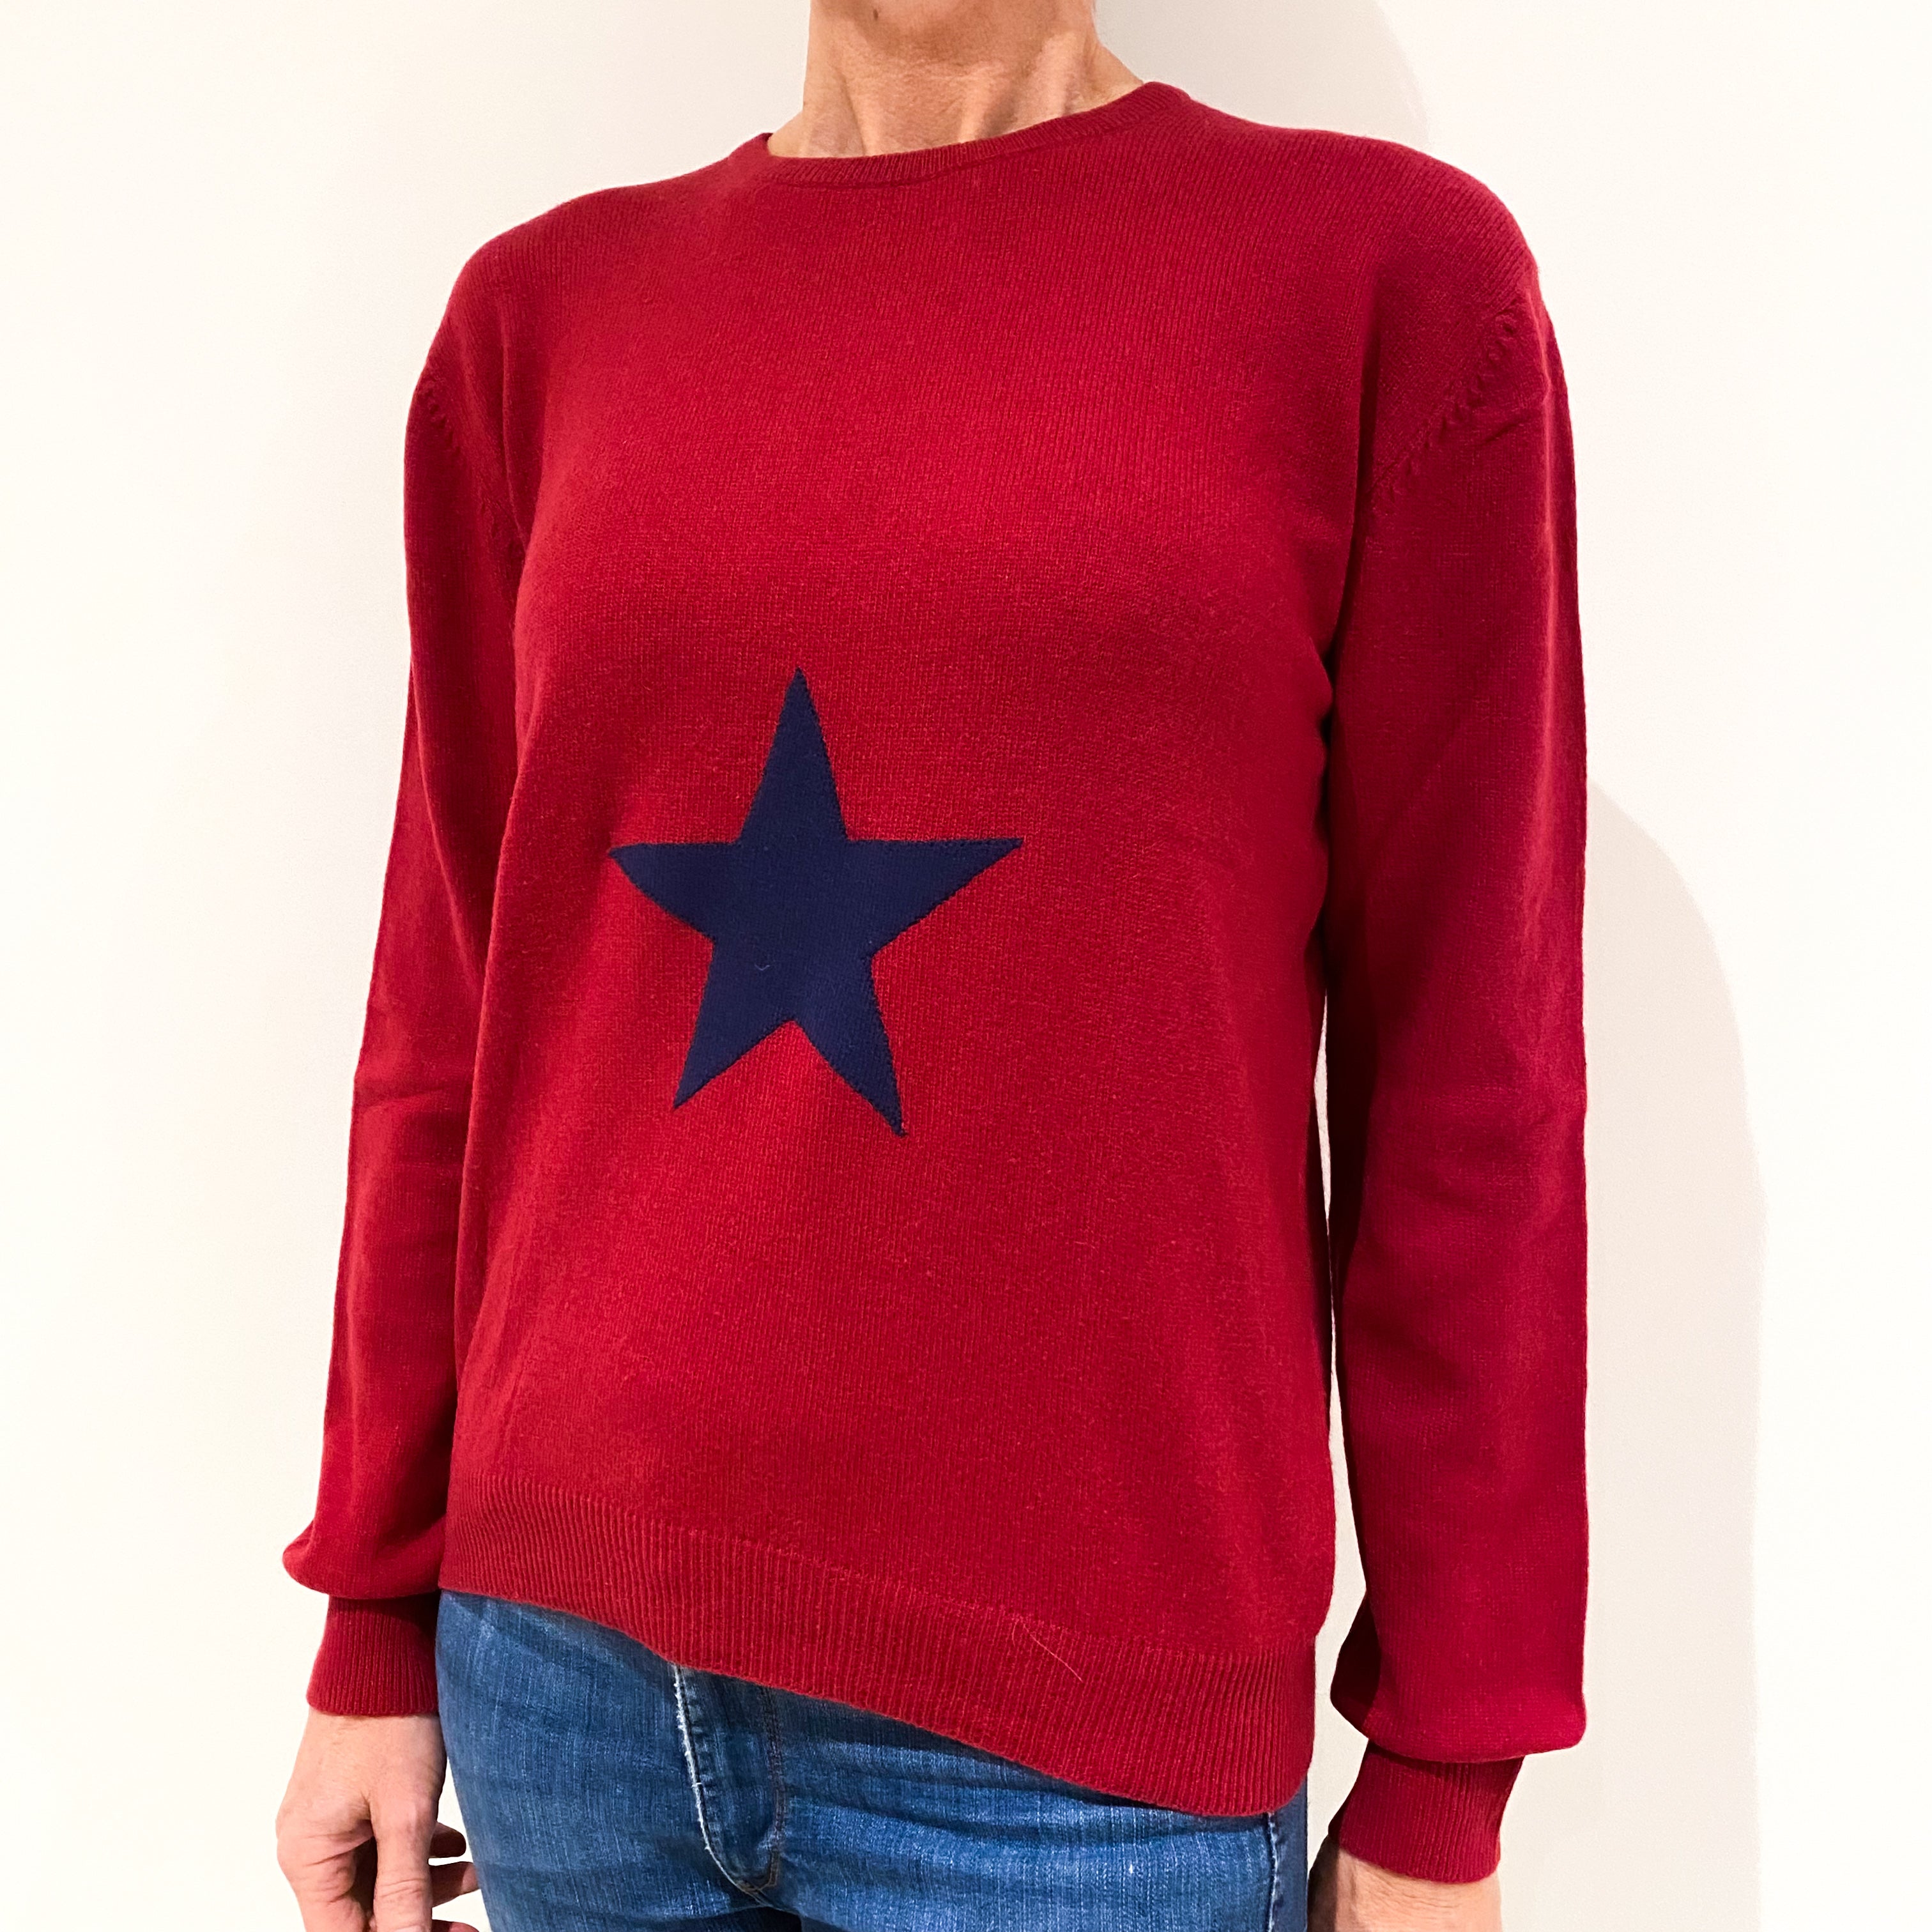 Vintage Cherry Red Cashmere Crew Neck Jumper Small